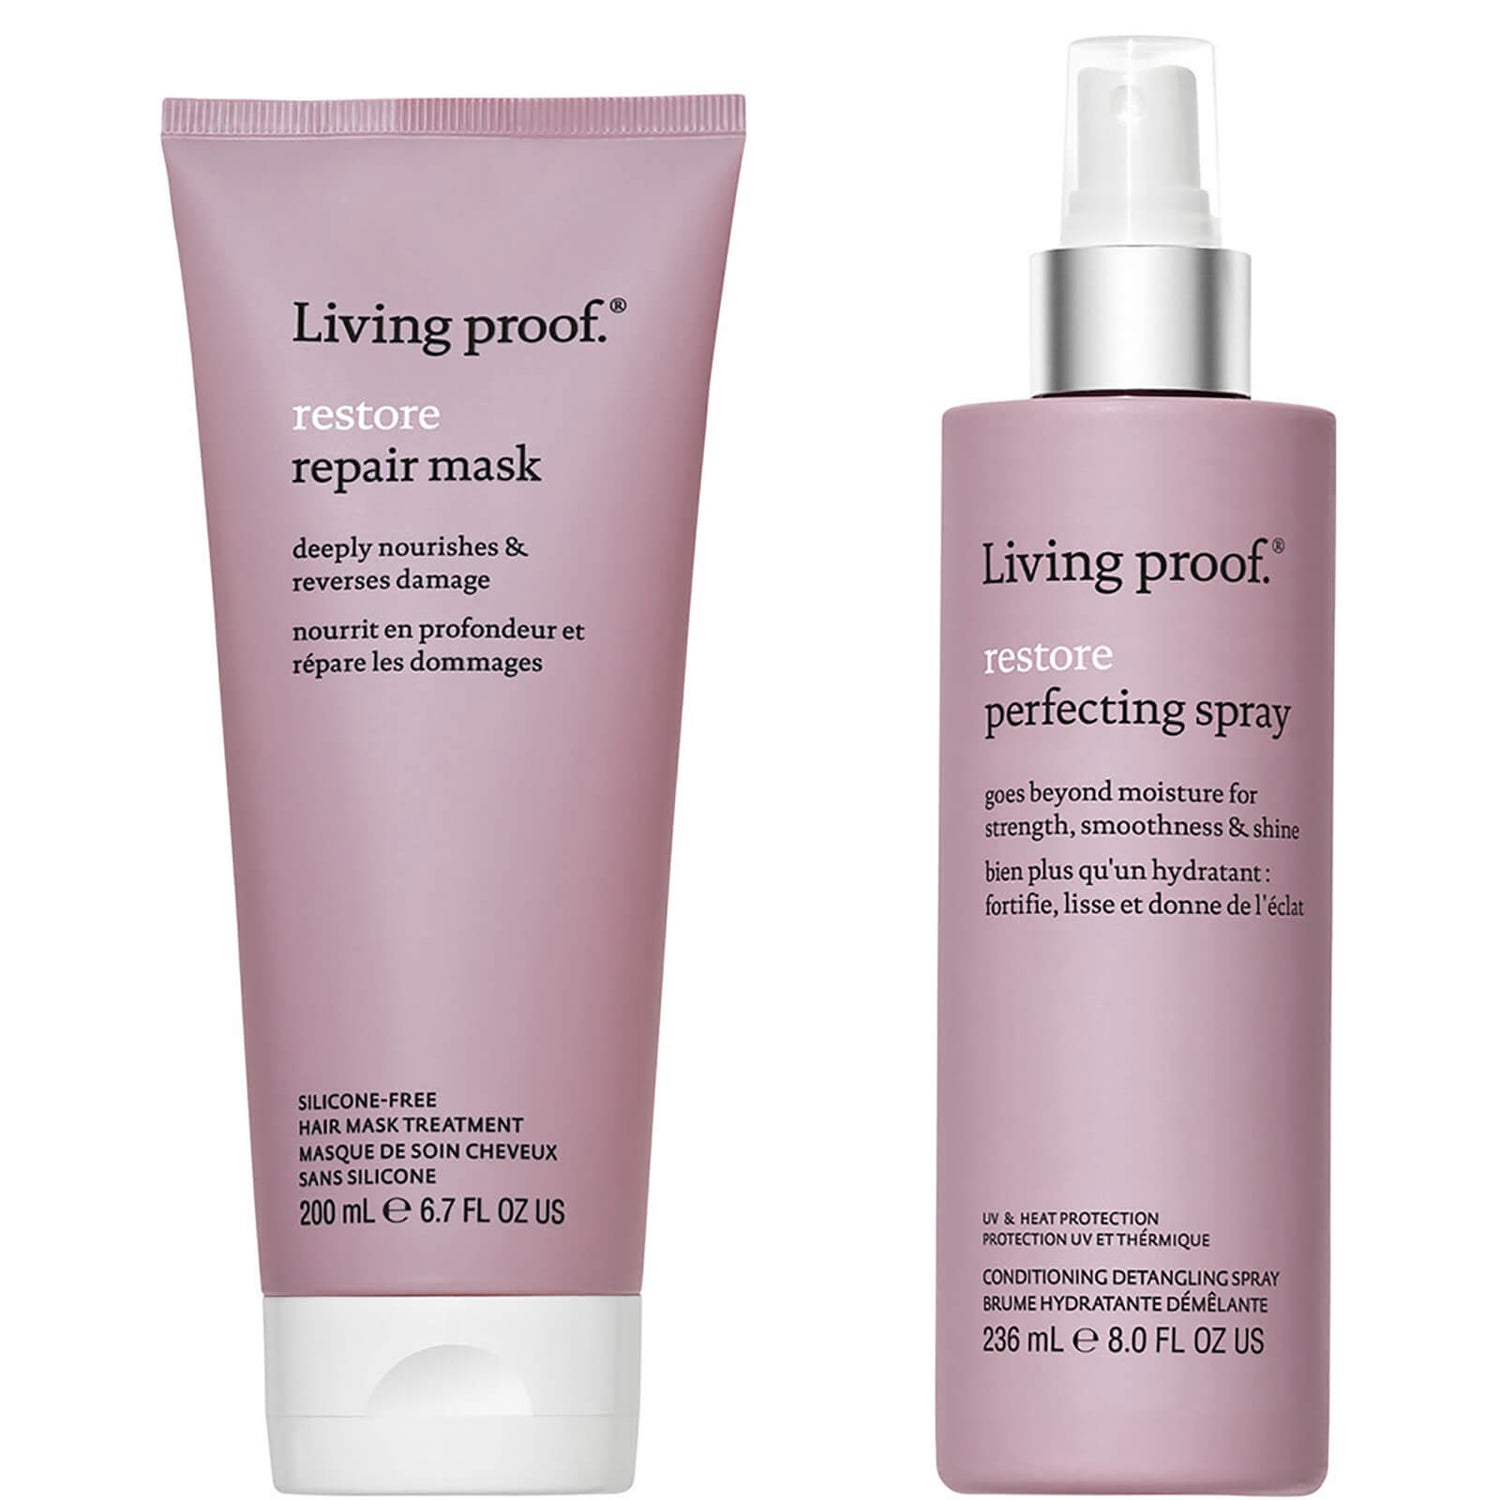 Living Proof Exclusive Restore Hair Kit (Worth $92.00)